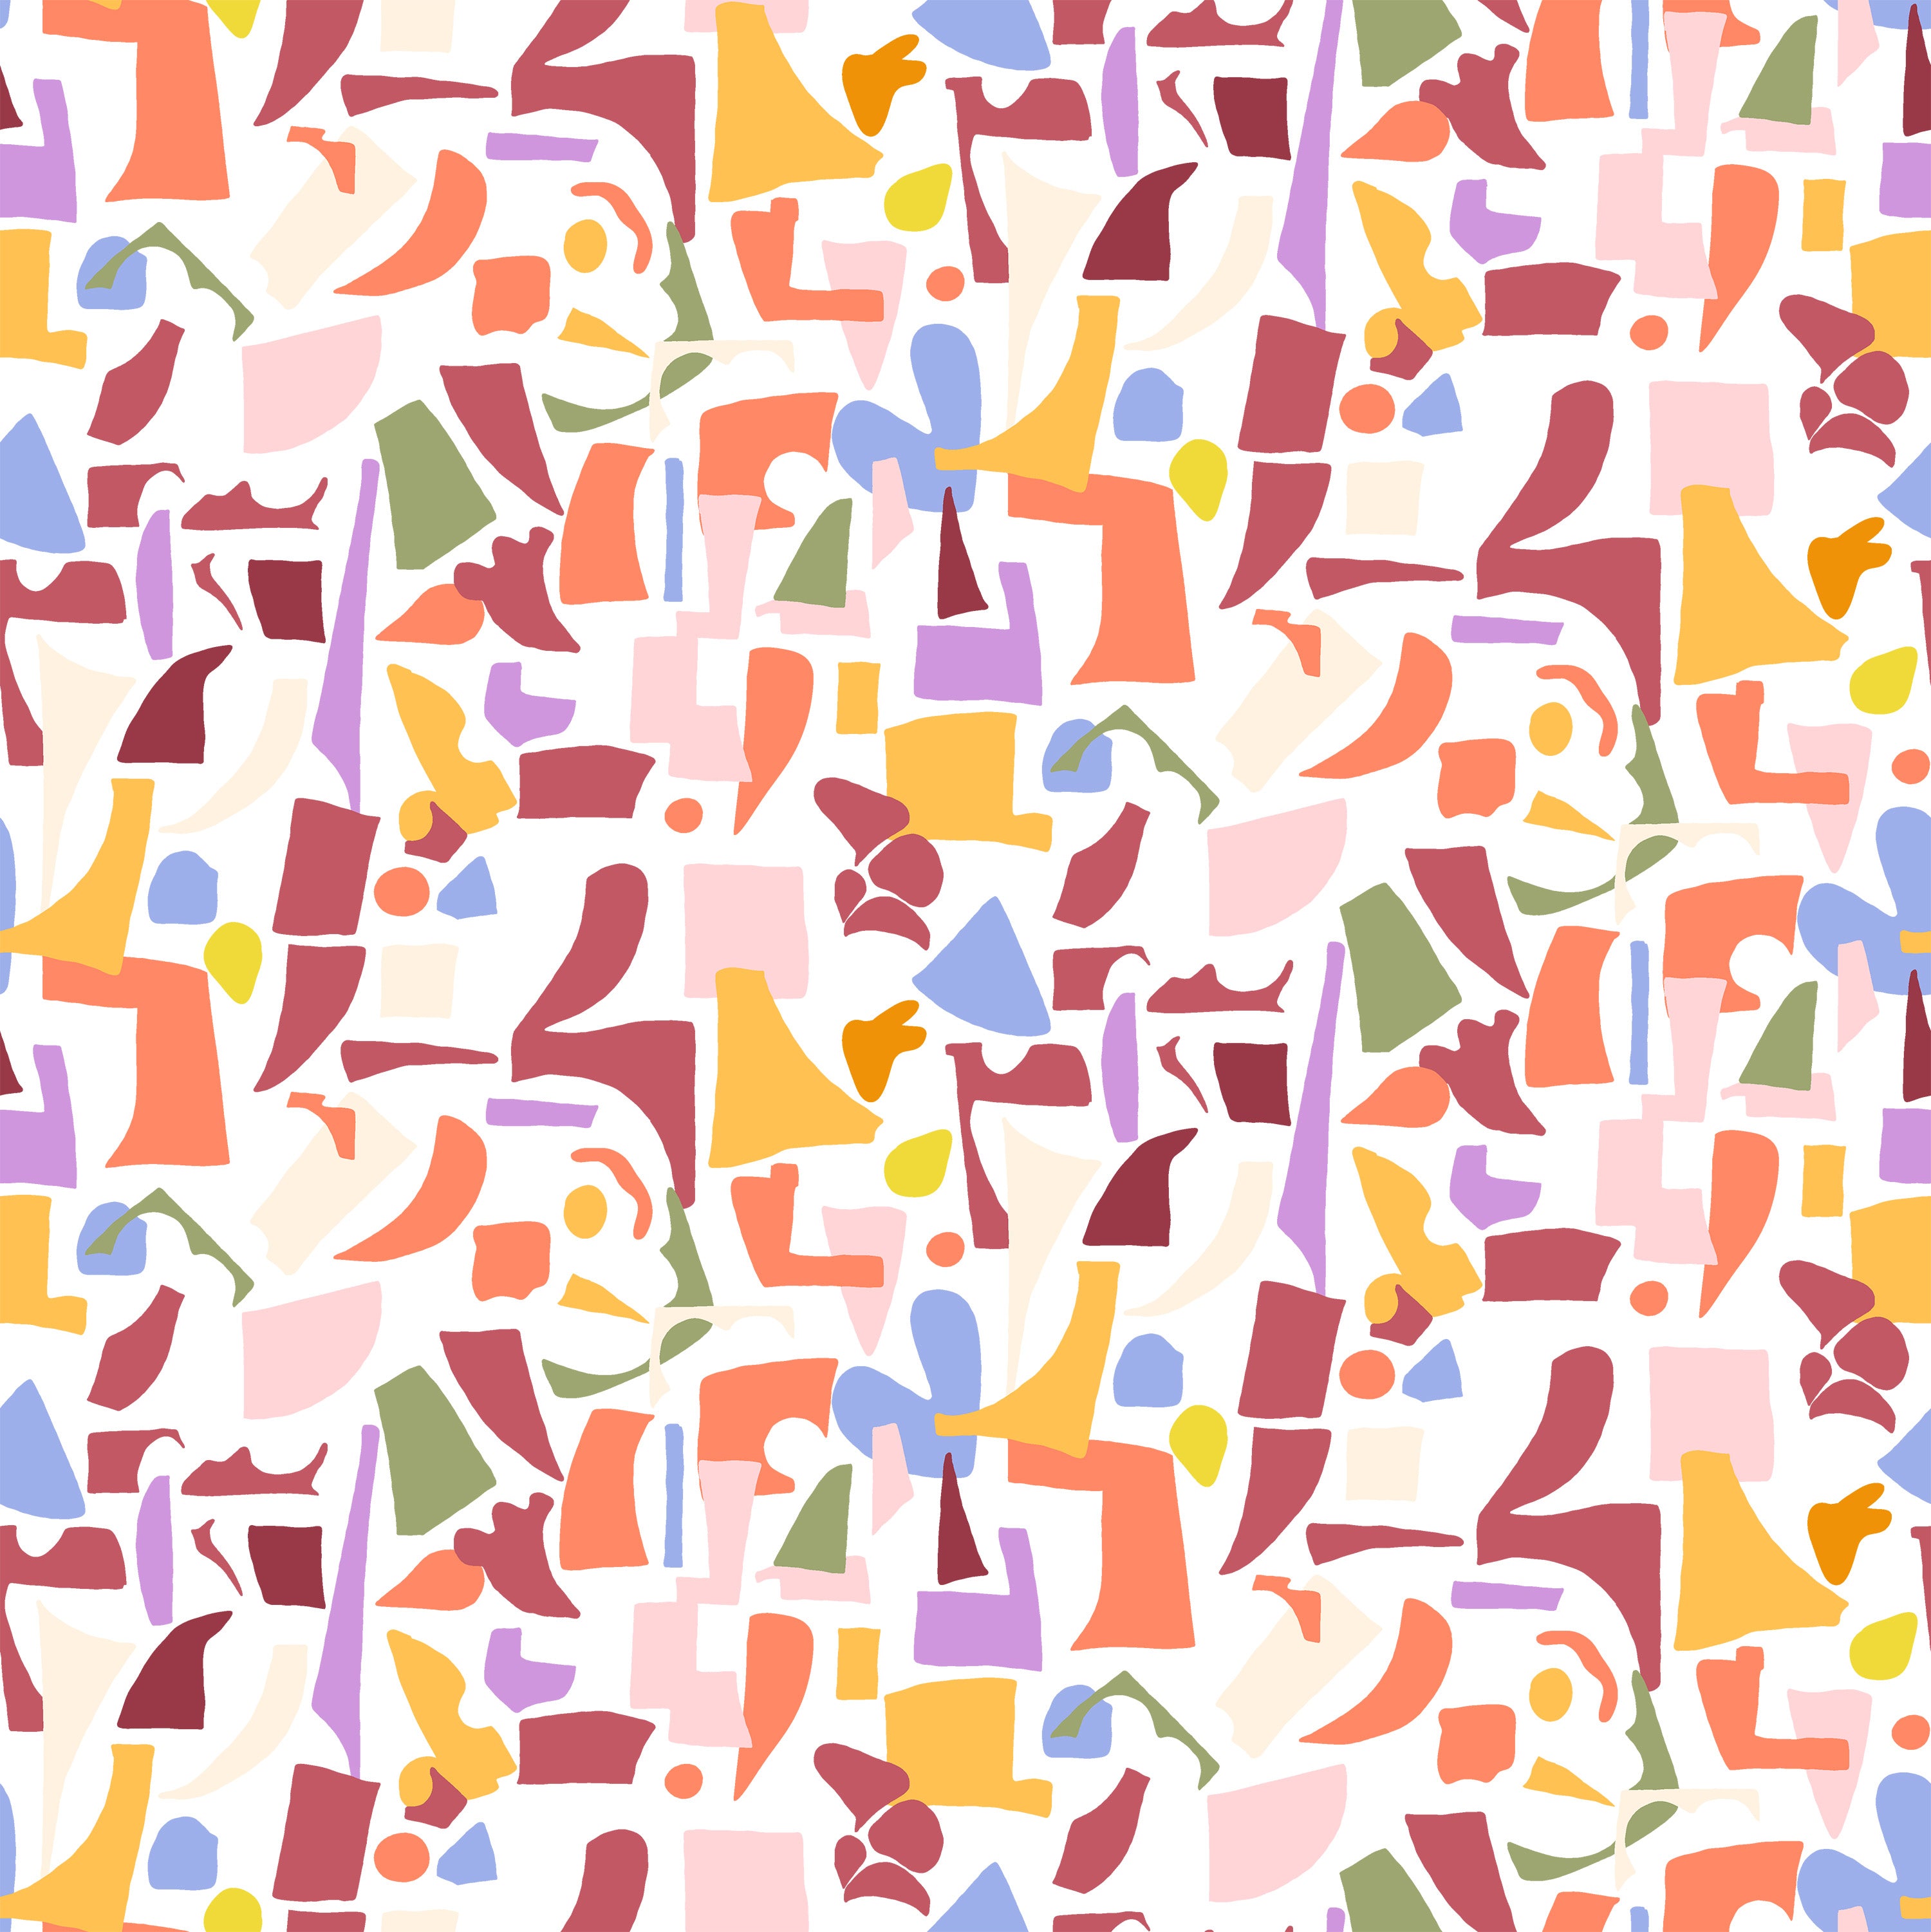 Close-up view of Geometric Jubilee Wallpaper showcasing an abstract pattern of colorful, overlapping geometric shapes in shades of pink, yellow, blue, and orange on a white background.